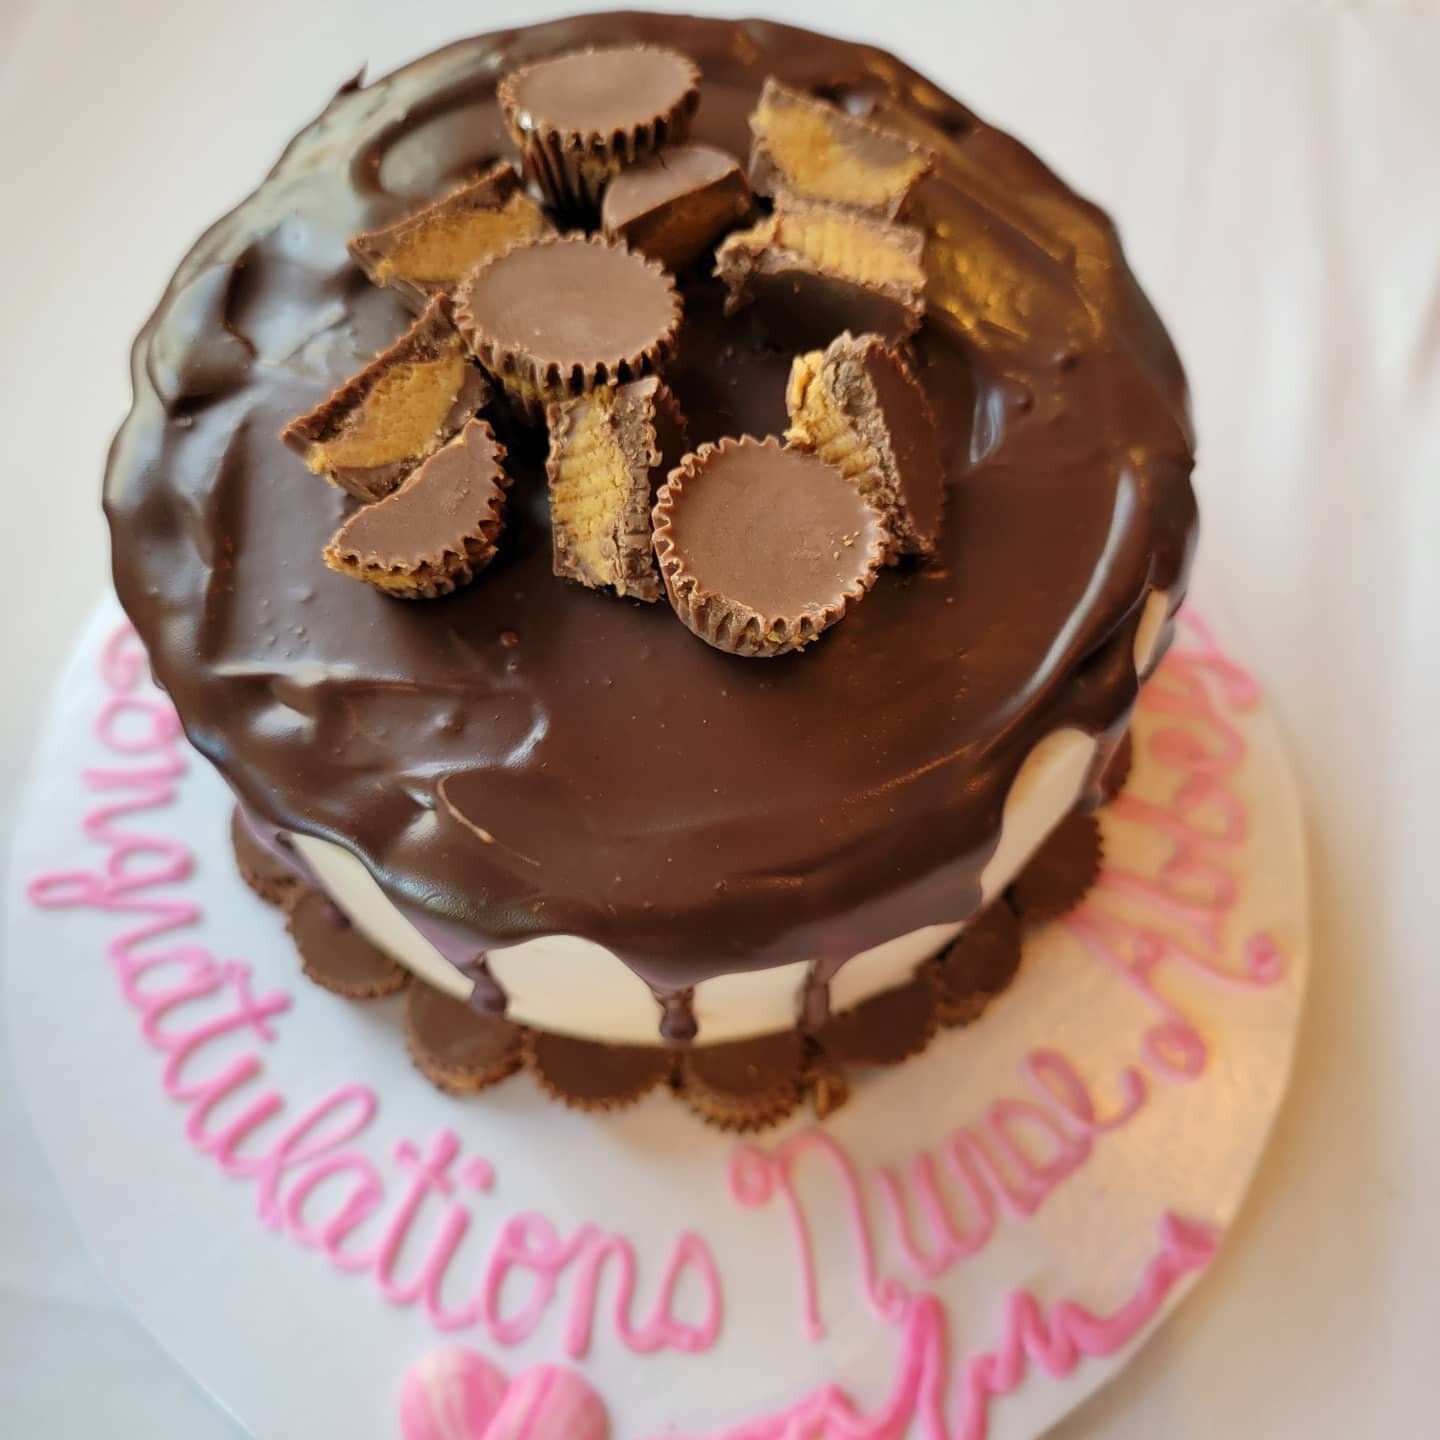 Celebrating Nurse Abbey's graduation!! Her request...Chocolate, peanut butter cake. 

#sweetnessinyourlife #bestcakeson30a #cakesofinstagram #seagroveplaza #graytonseafoodco  #southwalton #30alocalbusiness #madefromscratch #madewithlove #sweeton30a